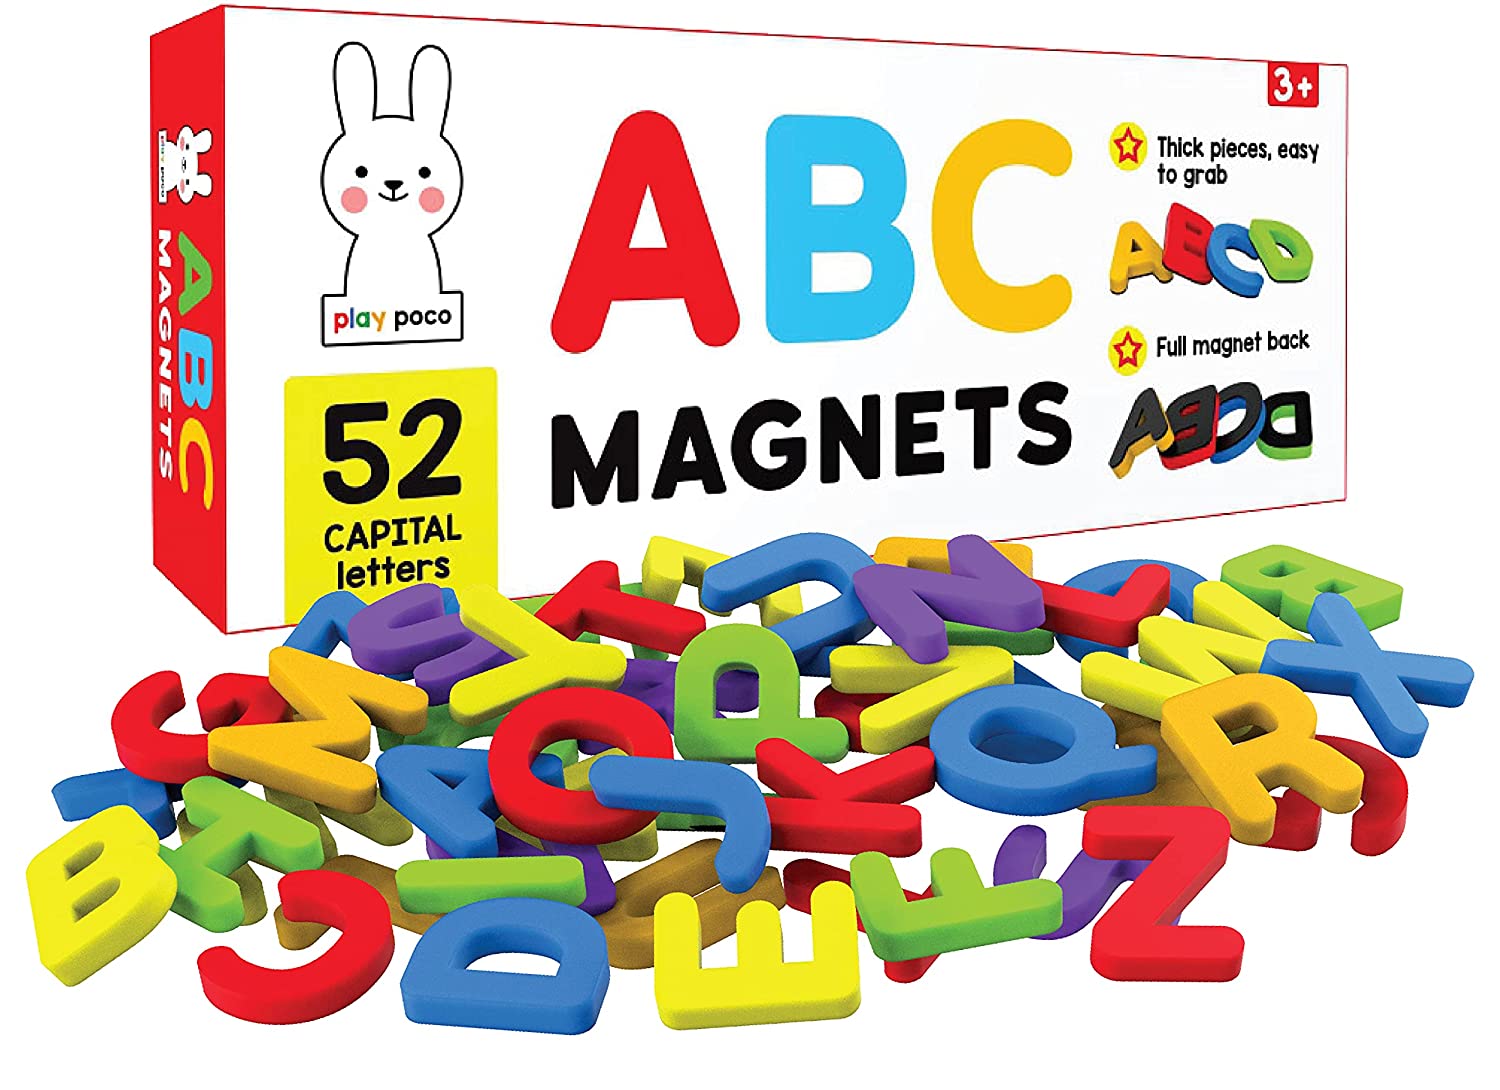 PLAY POCO ABC Magnets Capital Letters